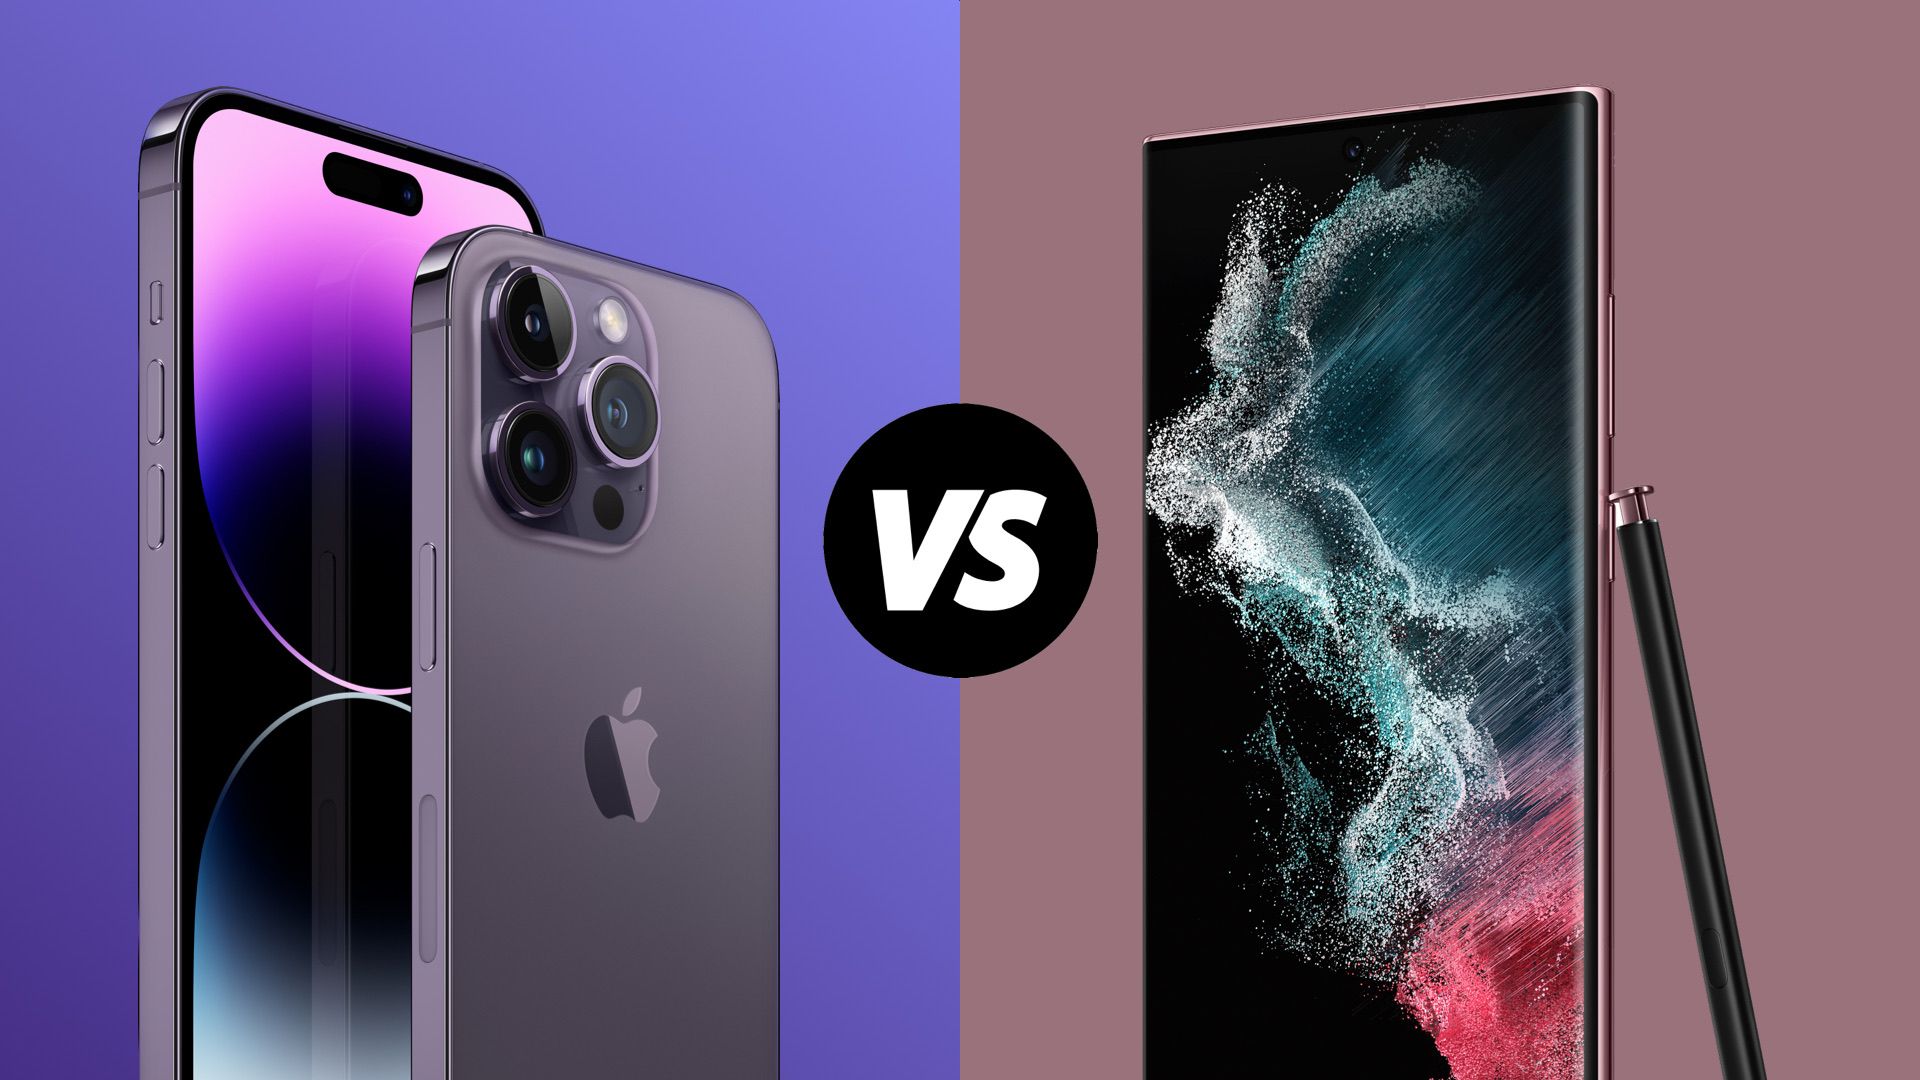 iPhone 14 Pro vs. Galaxy S22 Ultra: We Compare These Great Cameras for You  - CNET